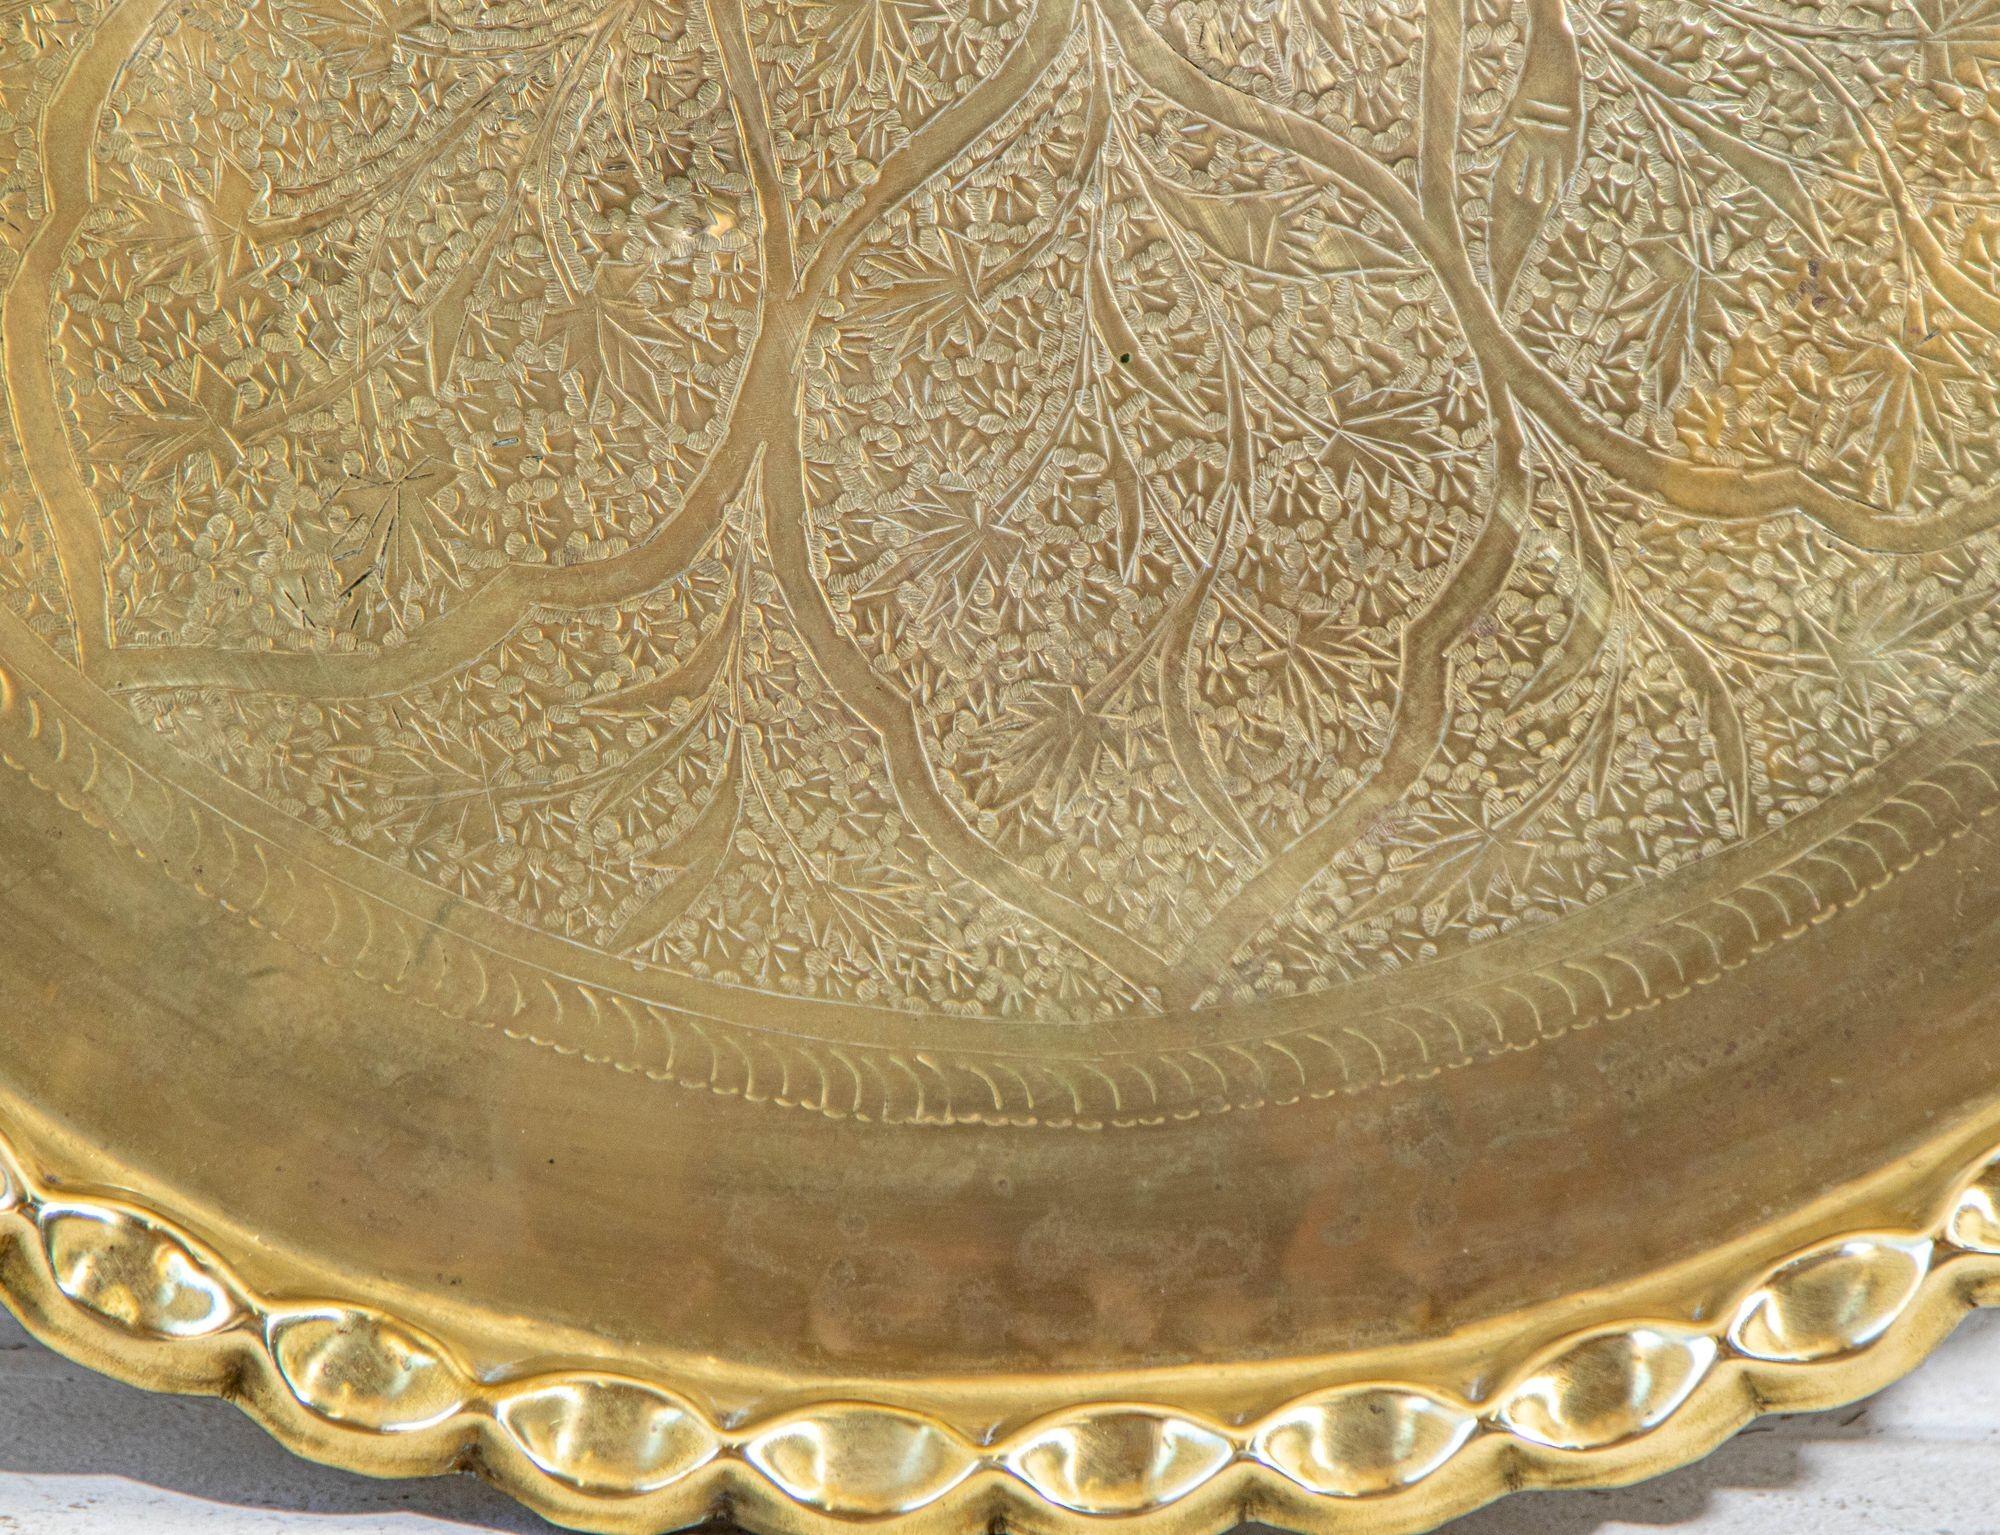 Asian Mughal Rajasthani Large Round Brass Tray with Crest Edges 30 in. Bon état - En vente à North Hollywood, CA